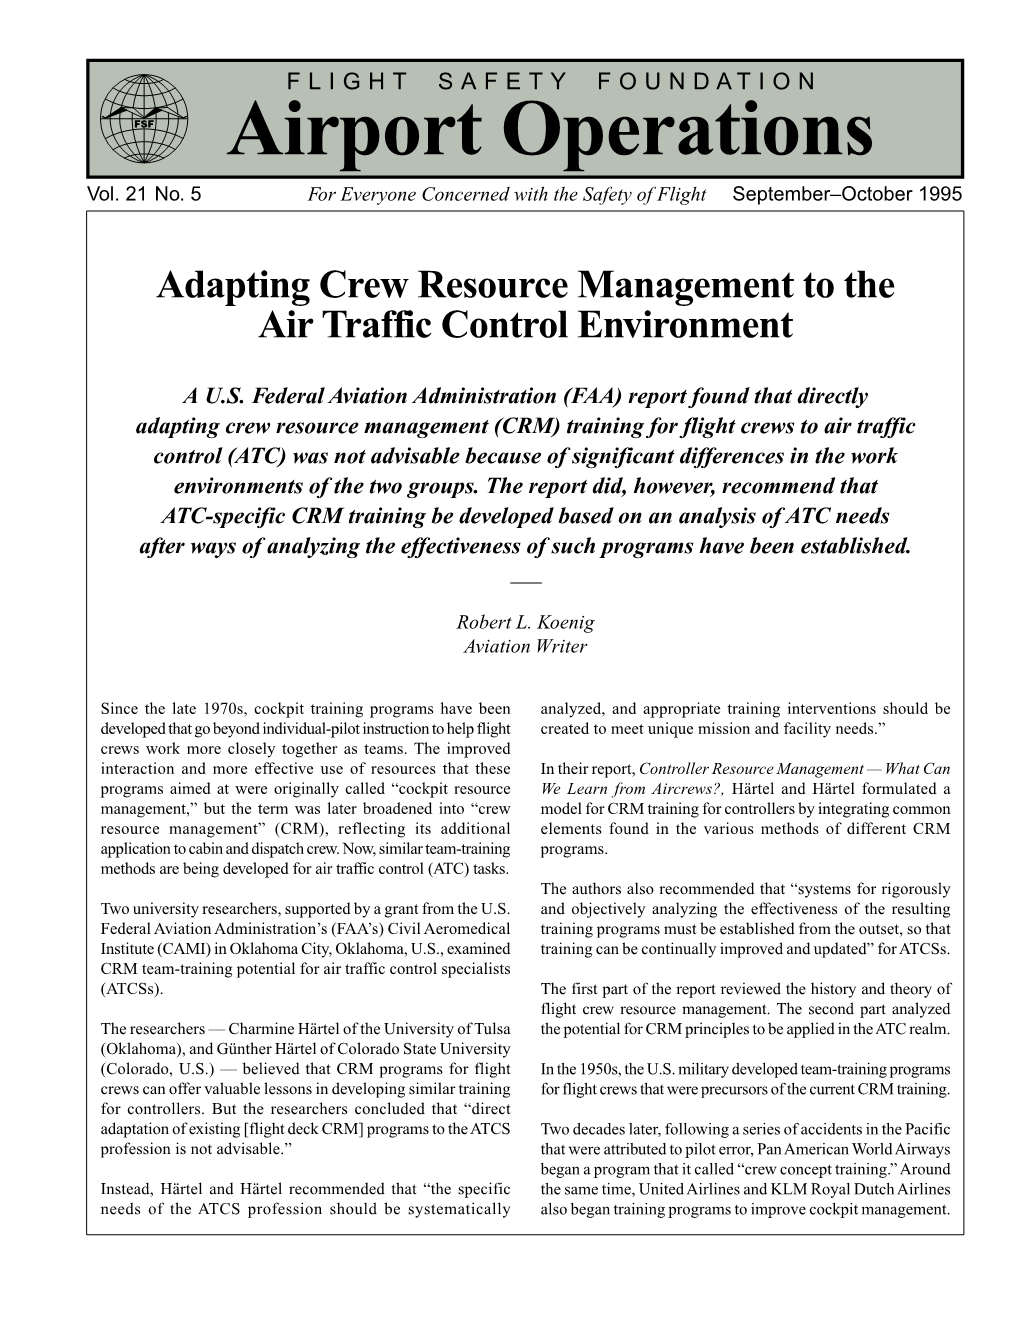 Adapting Crew Resource Management to the Air Traffic Control Environment